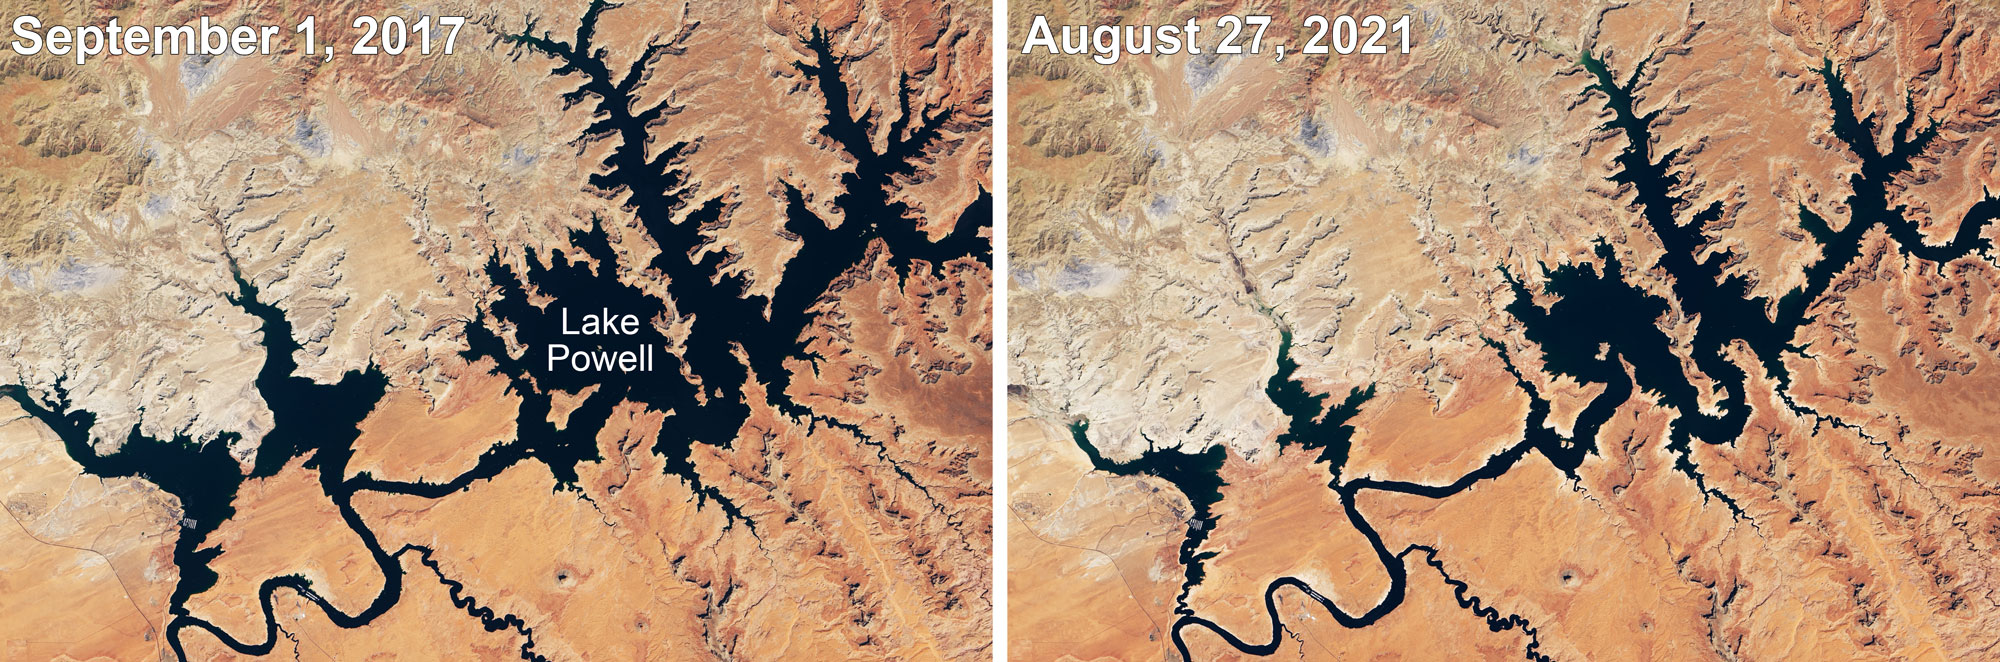 Satellite photographs showing Lake Powell in Arizona at two points in time: September 1, 2017, and August 27, 2021. In the photo from 2017, the lake covers more area; in 2021, the water level is noticeably lower, as indicated by the arms of the lake being thinner.